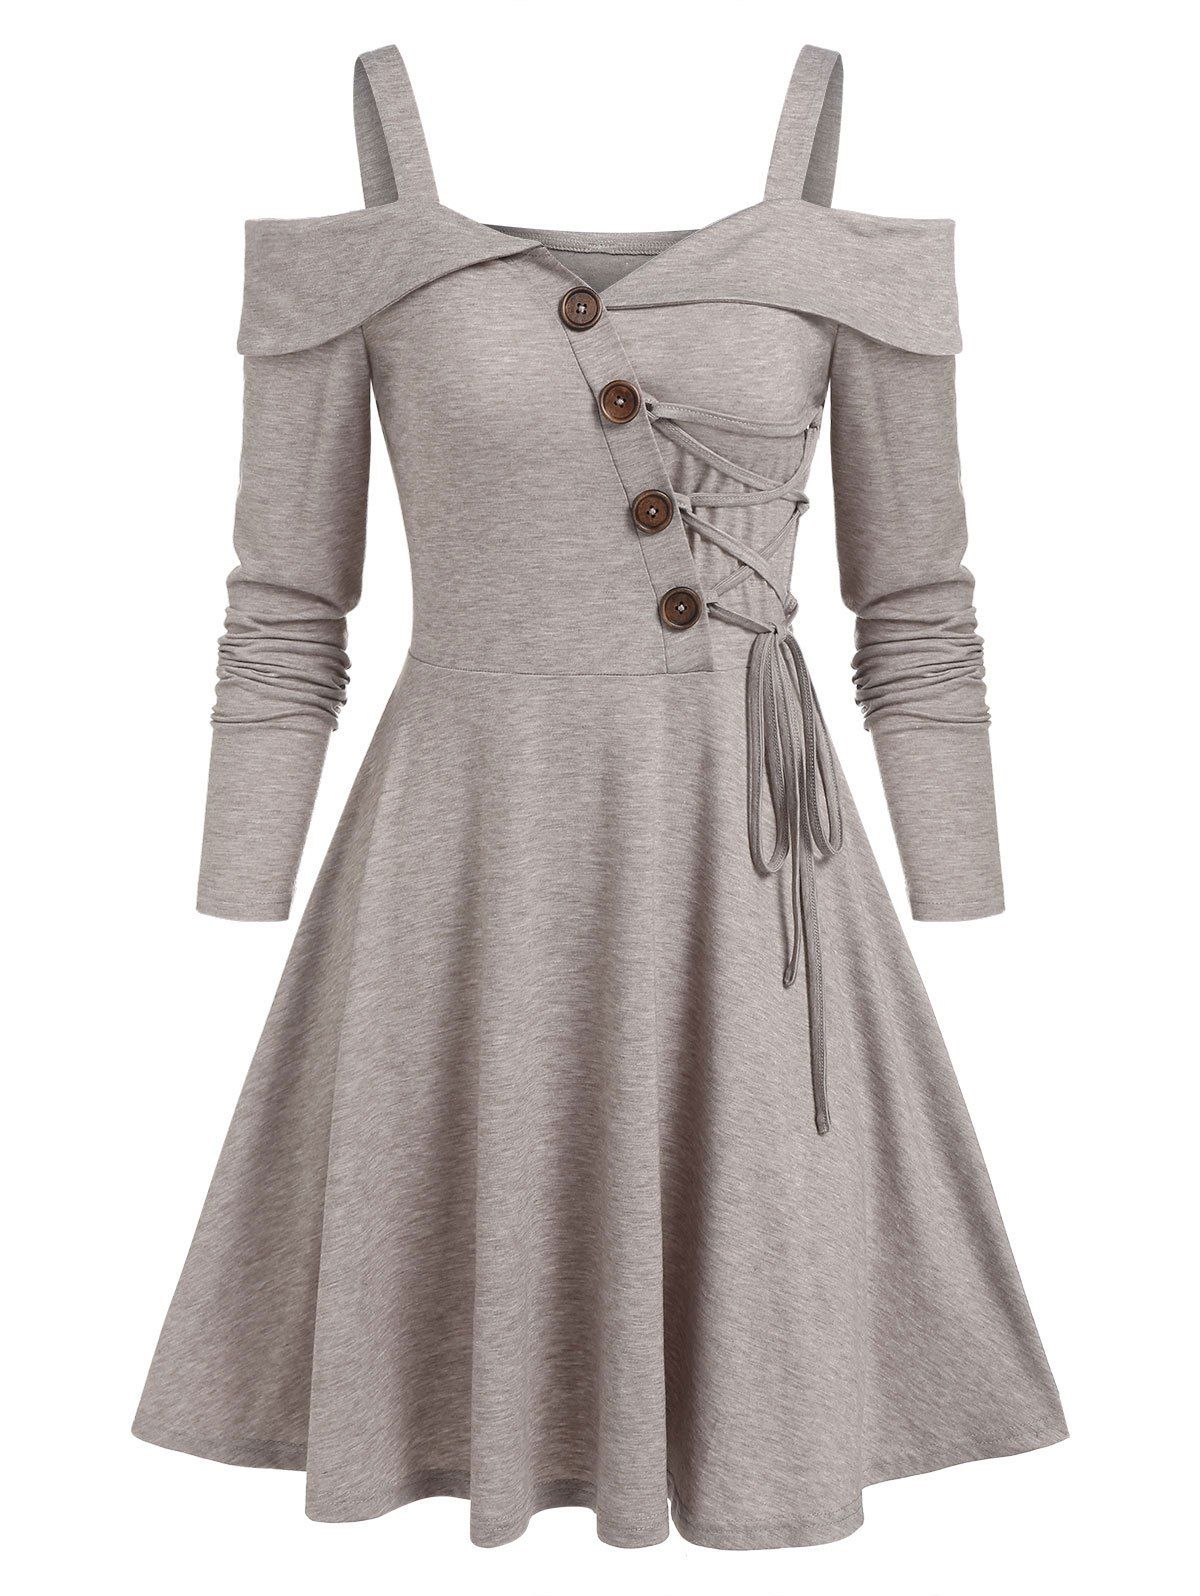 Cold Shoulder Lace-up Heathered Dress - LIGHT COFFEE XXXL